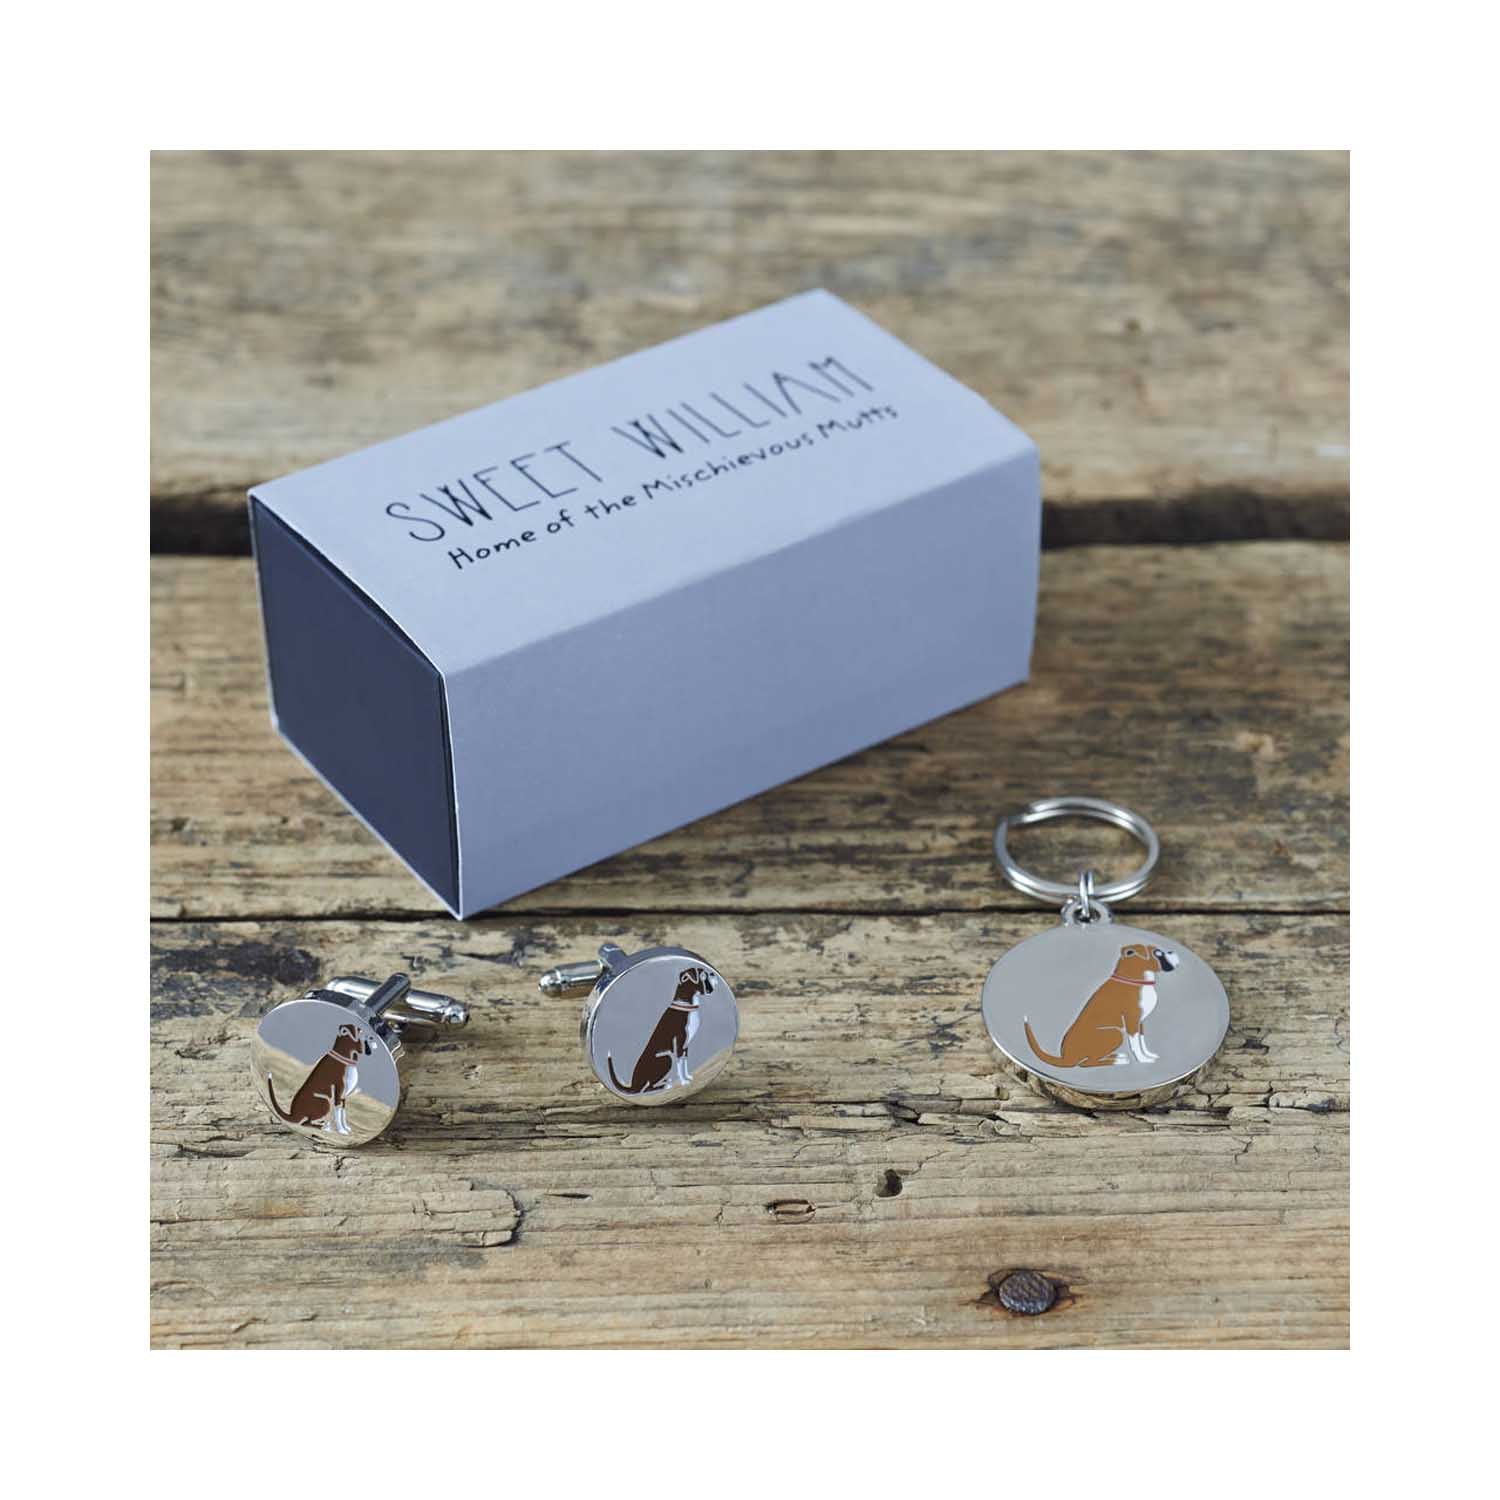 Dog Lover Gifts available at Dog Krazy Gifts - Archie The Boxer Cufflinks and Dog Tag Set - part of the Sweet William range of gifts for dog lovers available from Dog Krazy Gifts